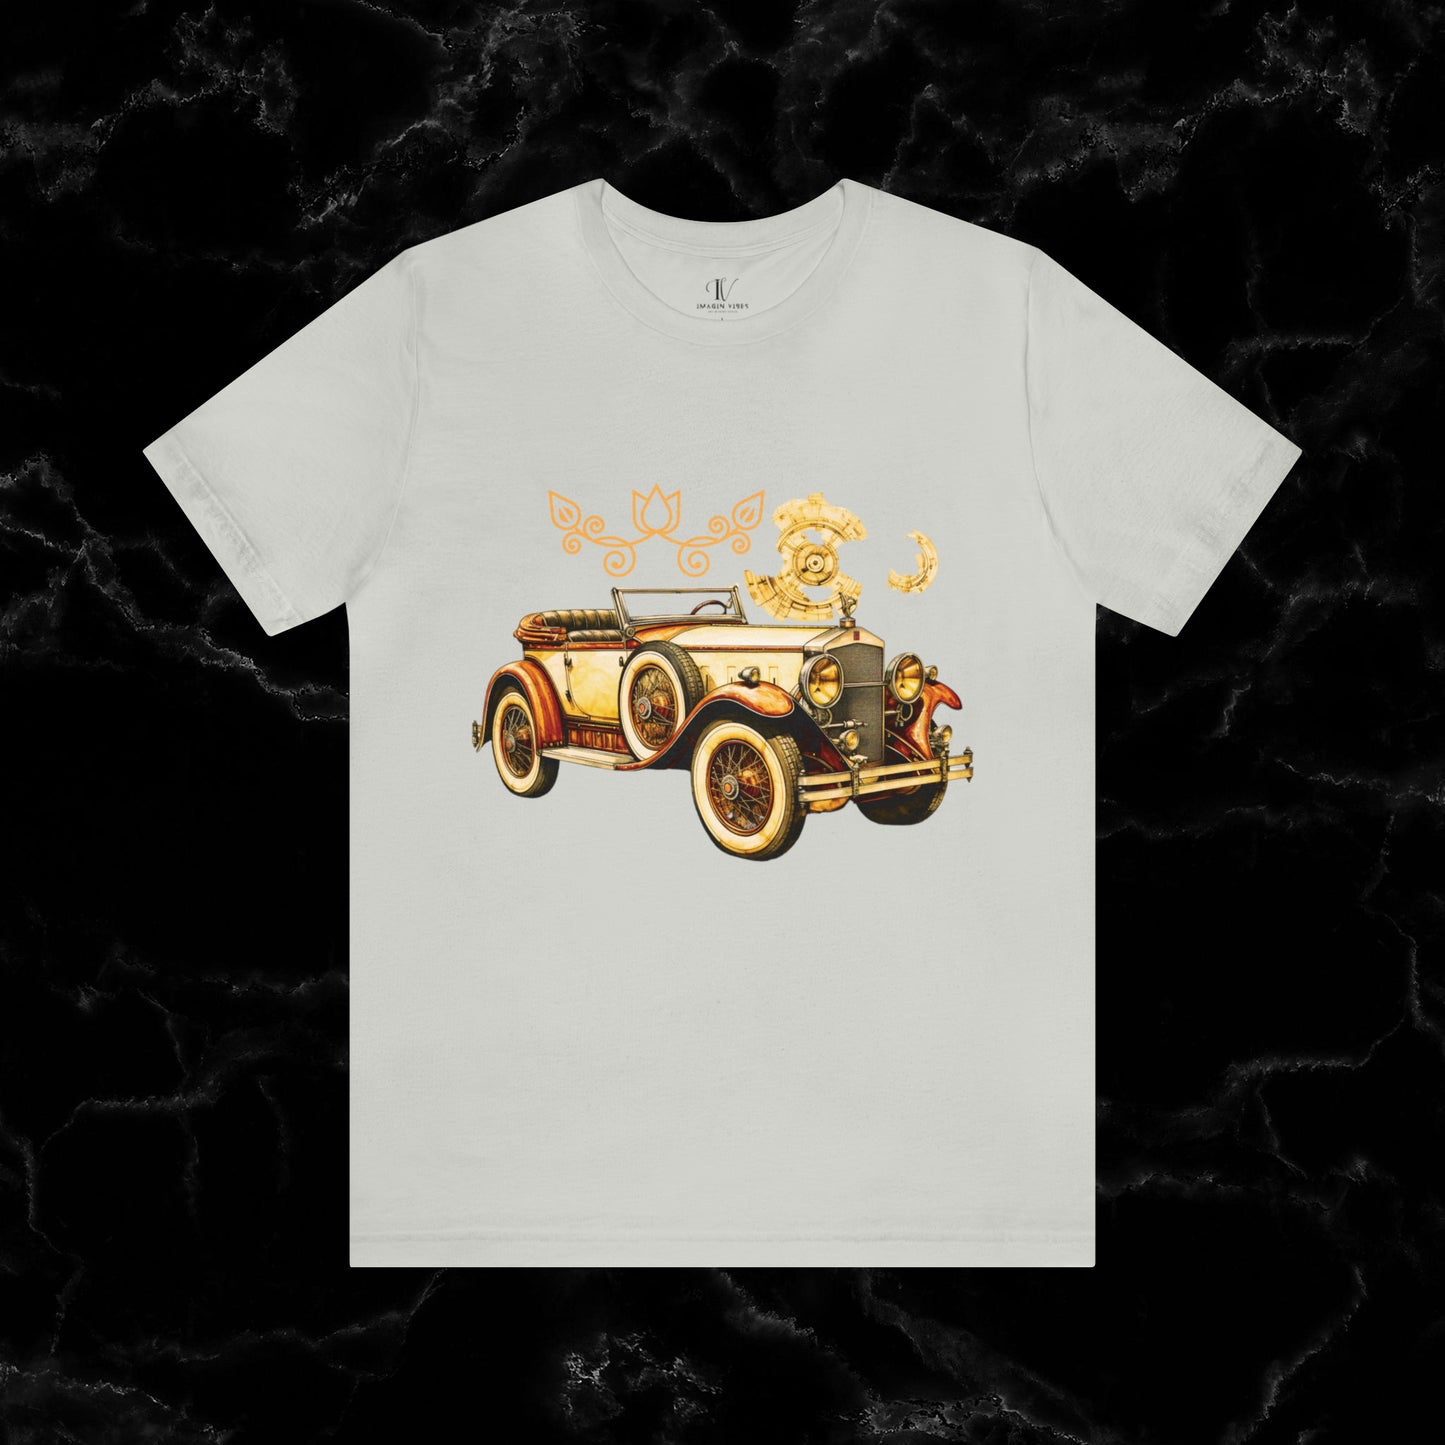 Vintage Car Enthusiast T-Shirt - Classic Wheels and Timeless Appeal for Automotive Enthusiast T-Shirt Silver S 